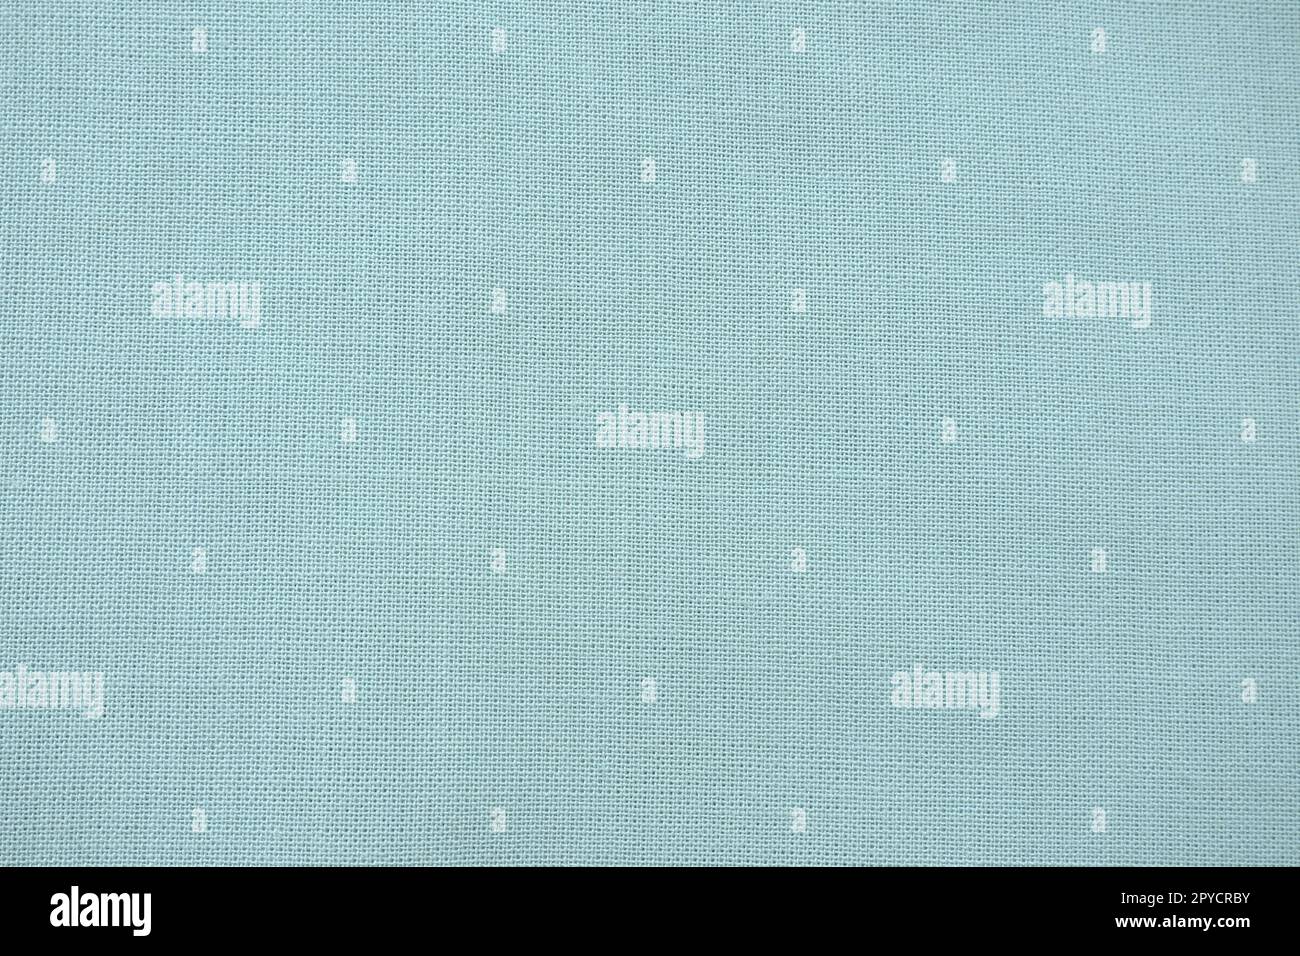 texture of natural light green or blue fabric close-up. The texture of the fabric is made of natural cotton or linen textile material. Green canvas background. Smooth surface of mint-colored fabric Stock Photo